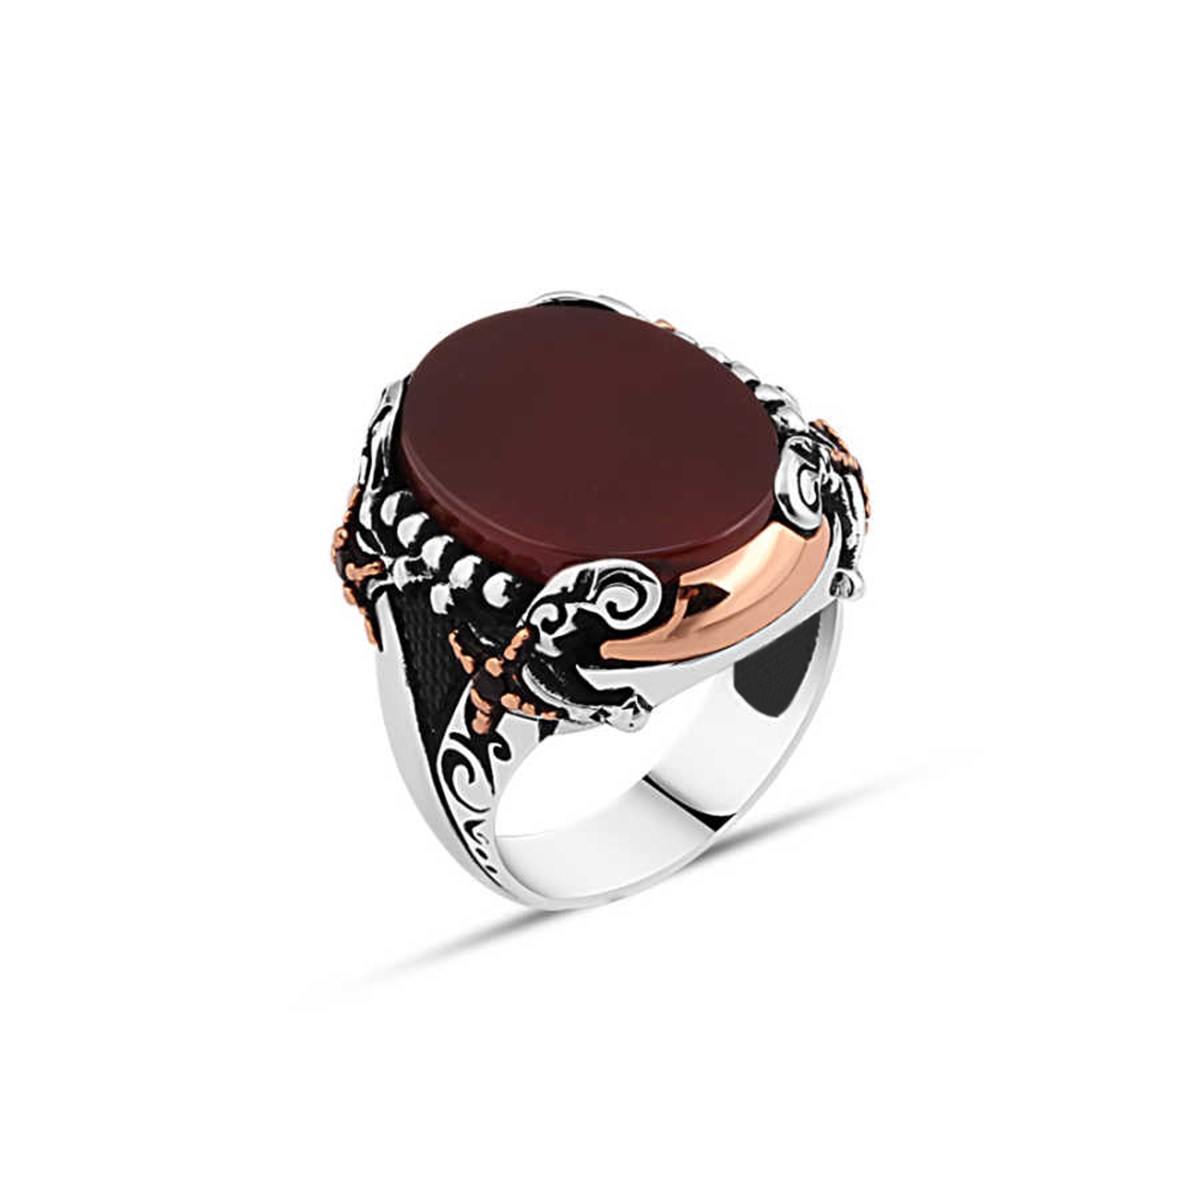 Sterling Silver Men's Ring with Plain Agate Stone and Sword